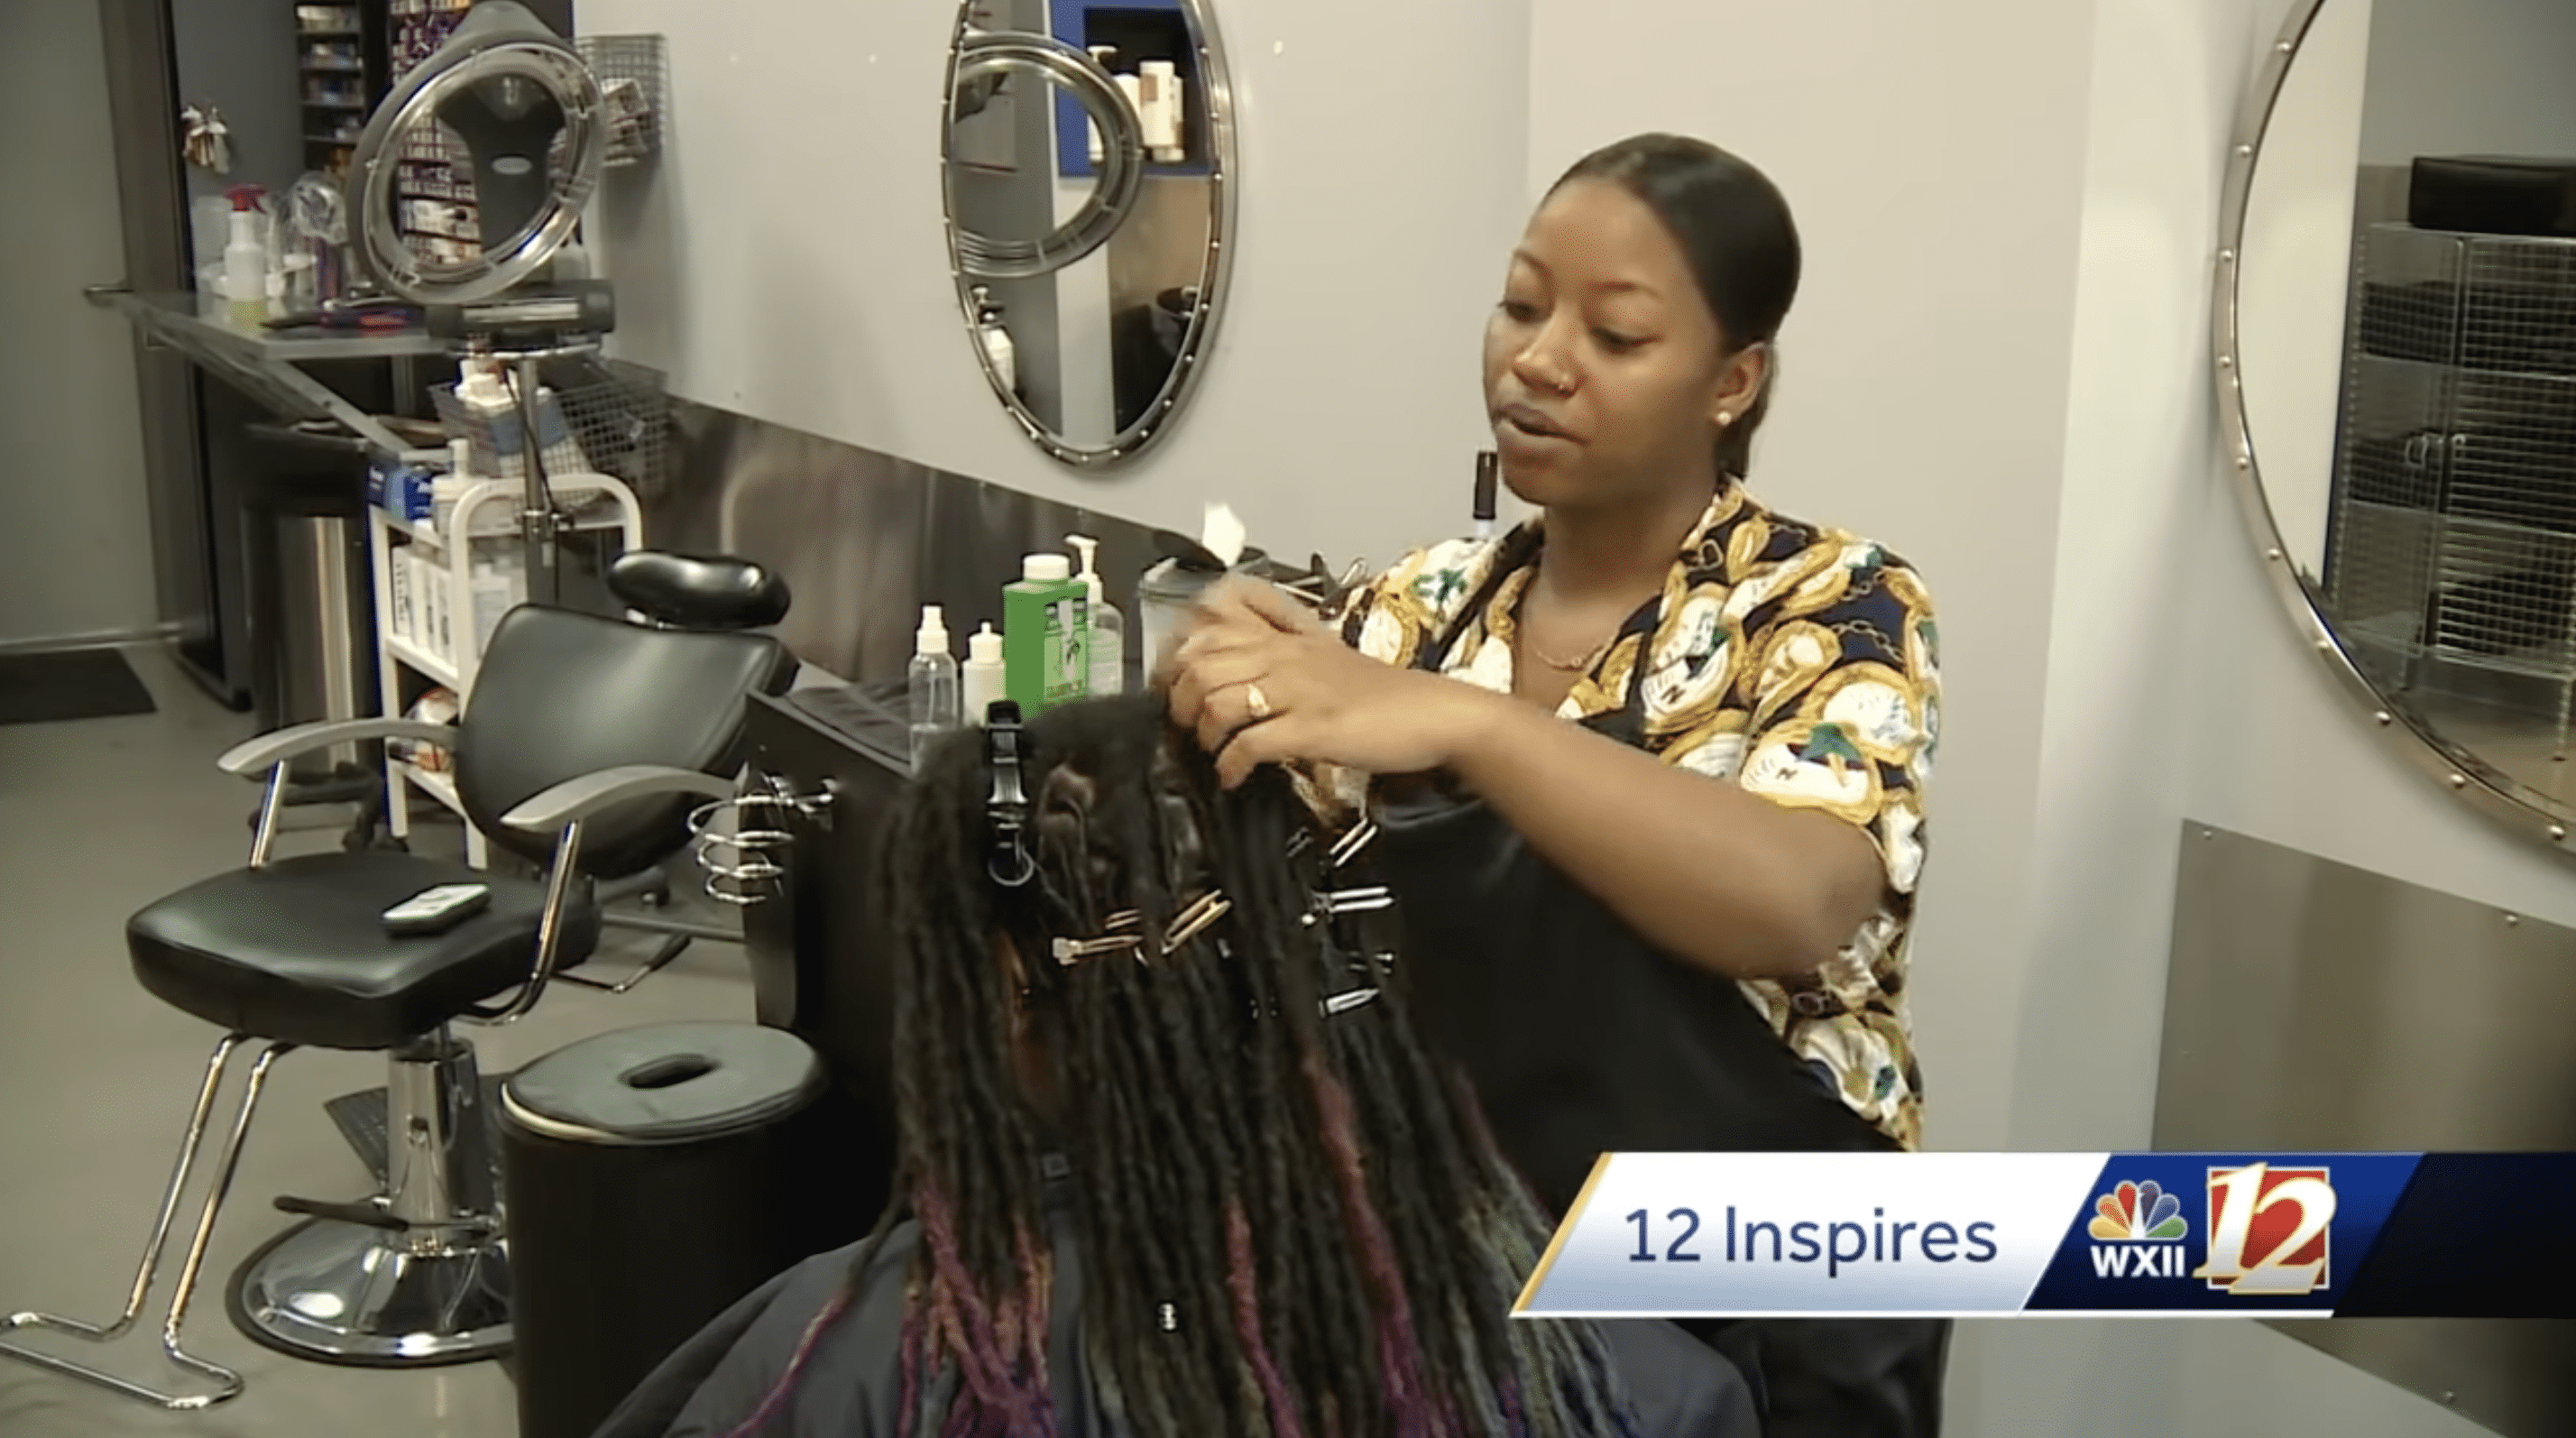 Breanna Turner serves a client in the salon. | Photo: youtube.com/wxii